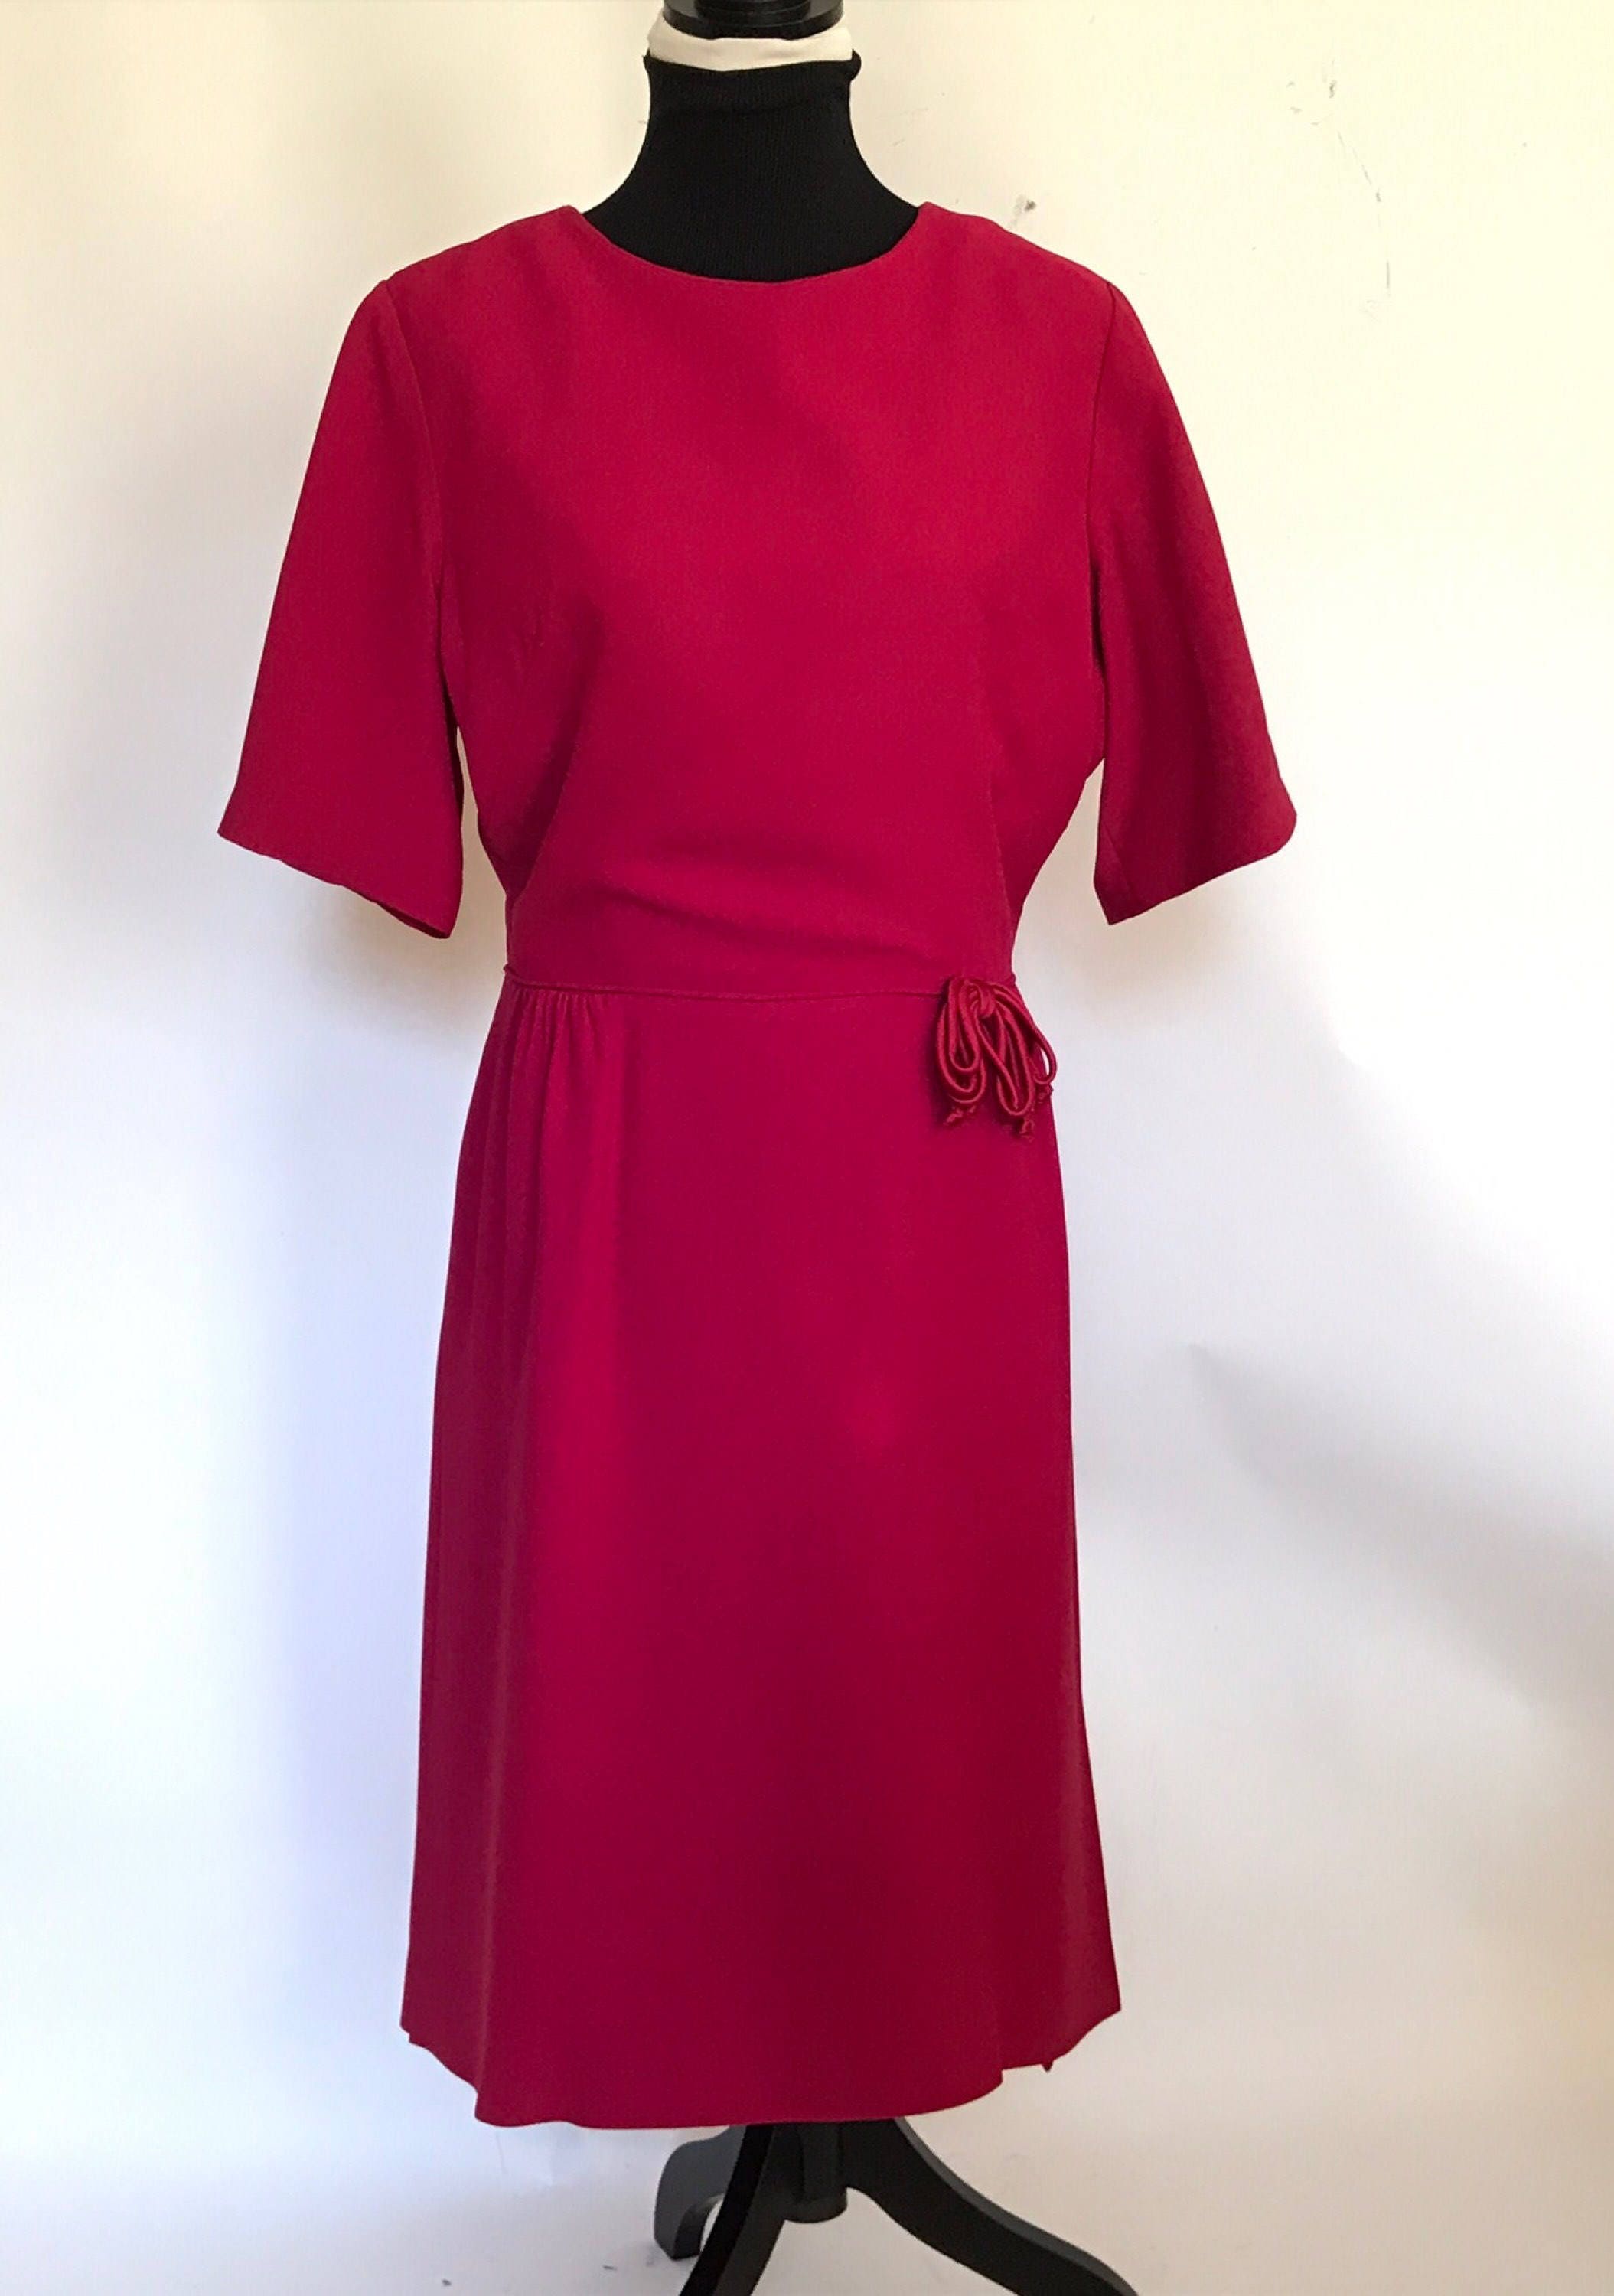 Vintage 1950s Sheath Red Crepe Day Dress With Short Sleeves | Etsy Canada